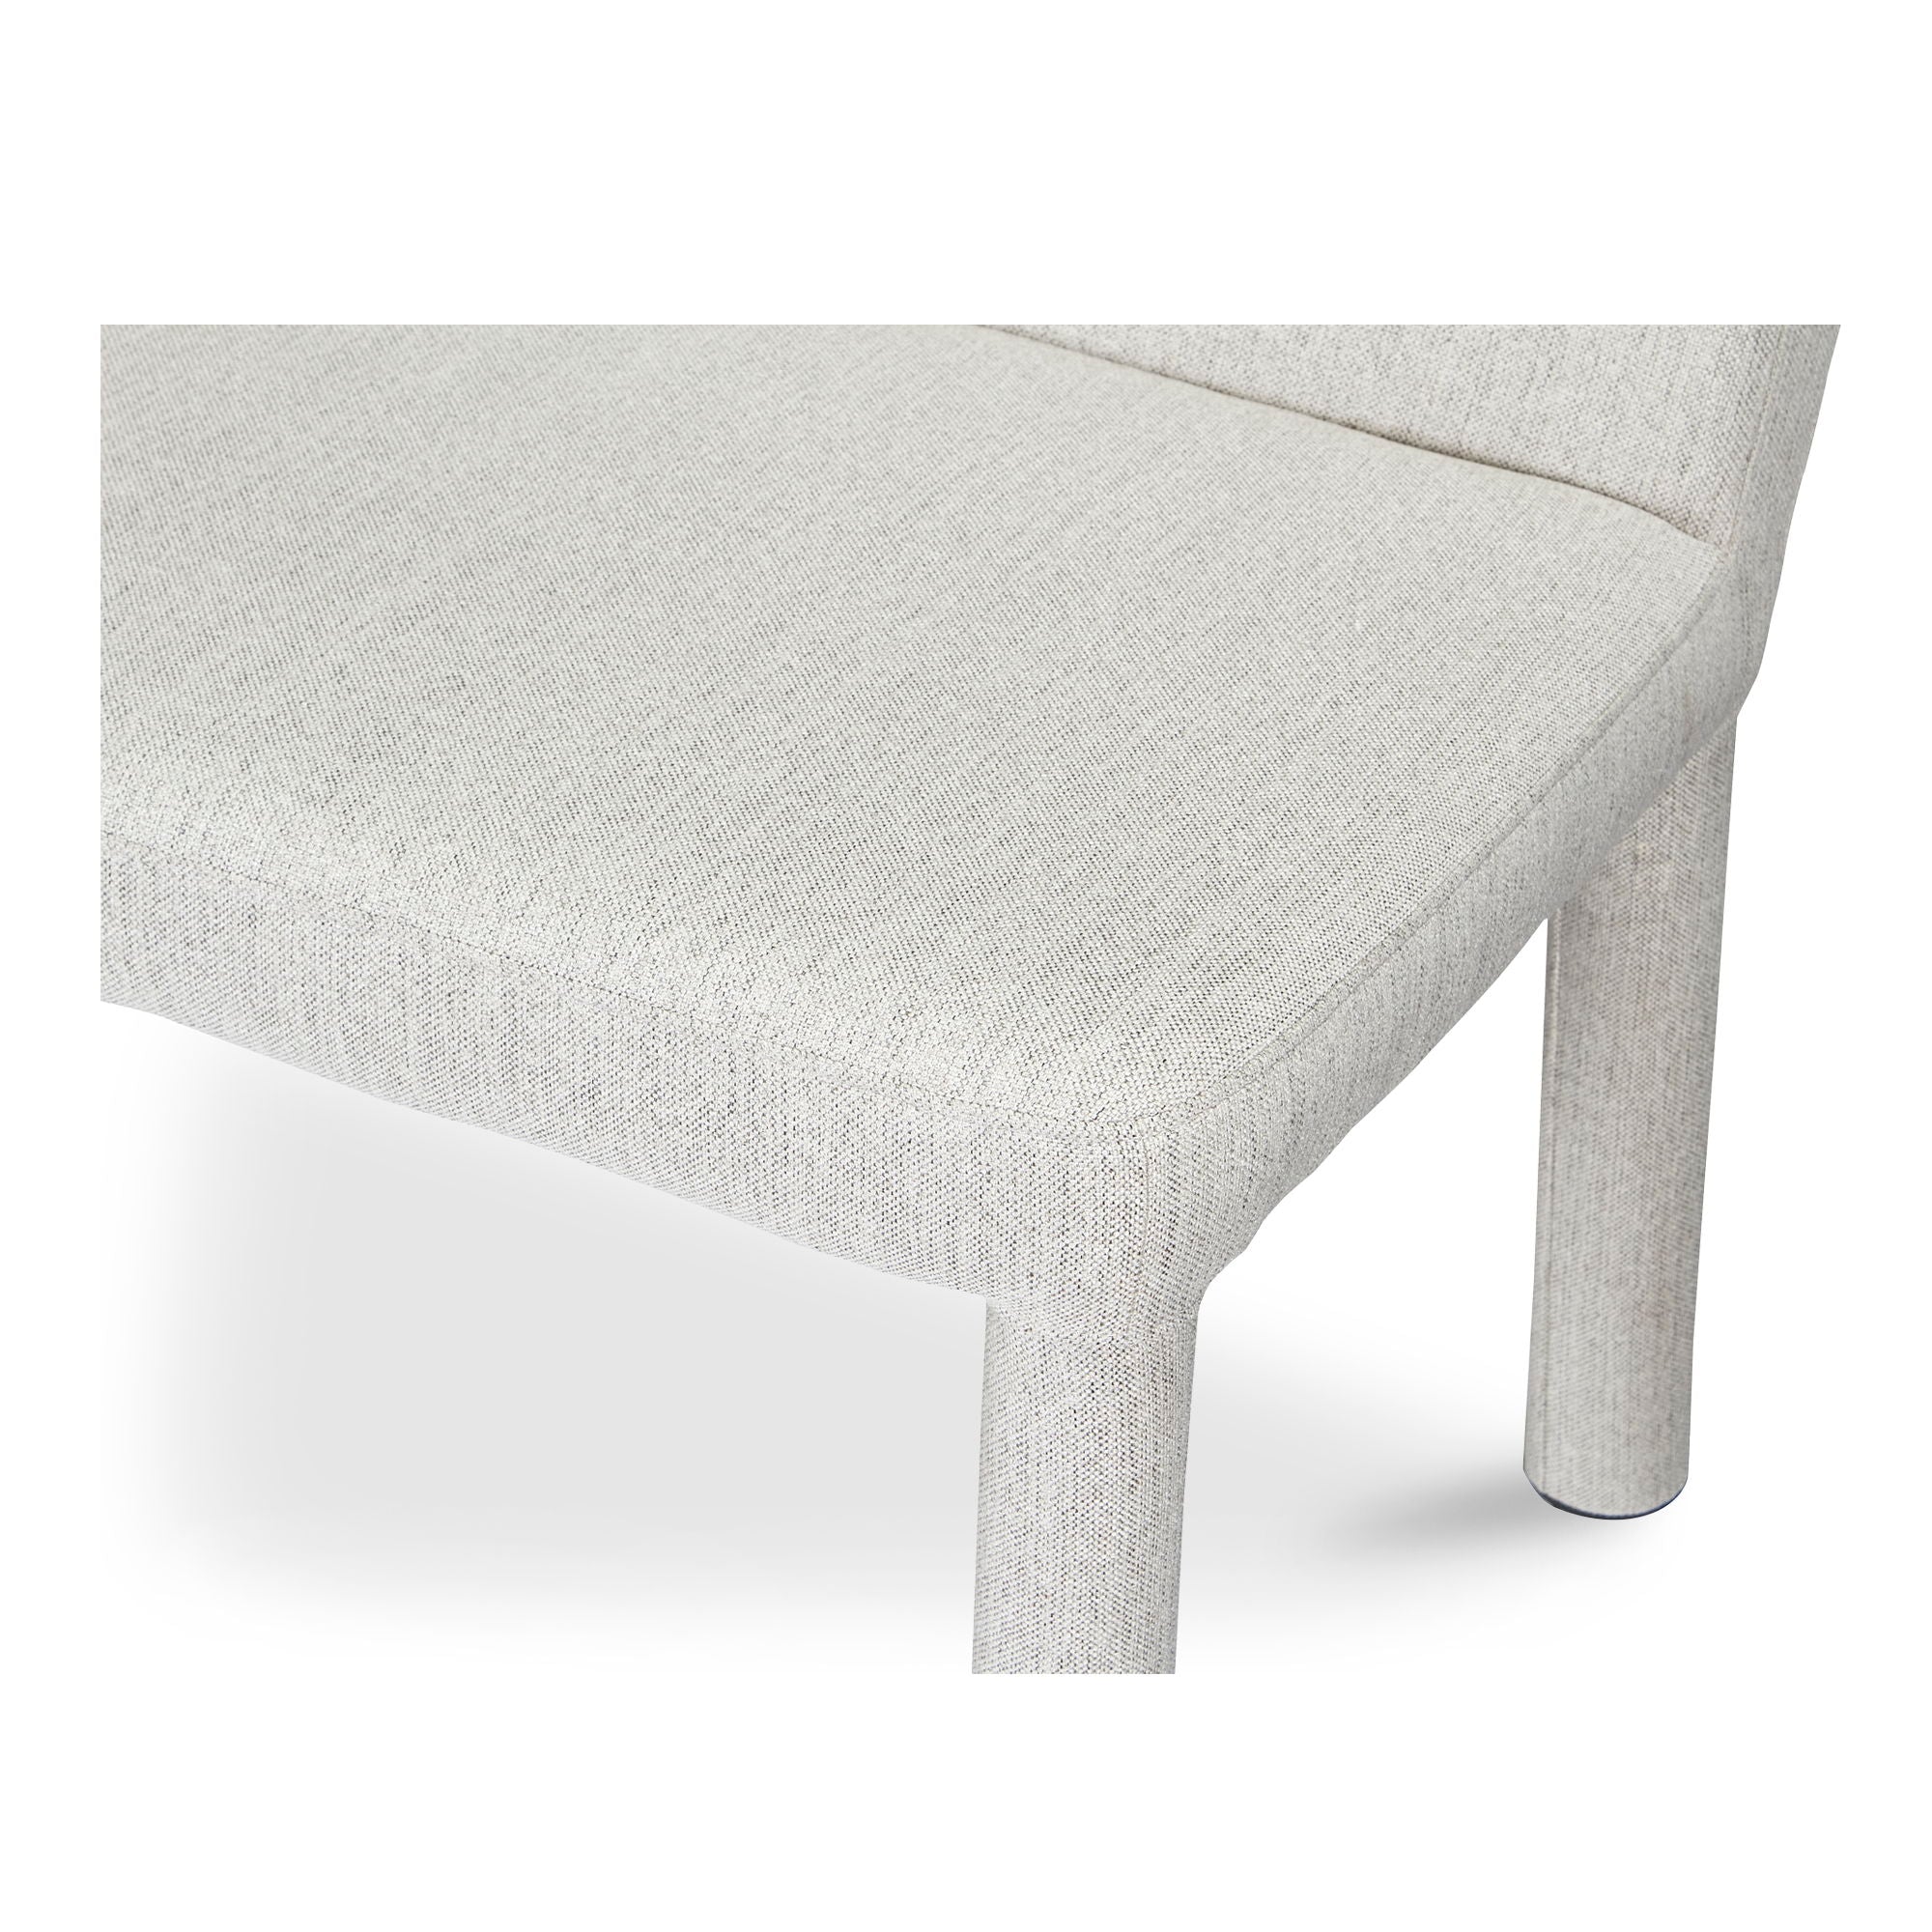 Place - Dining Banquette - Light Grey